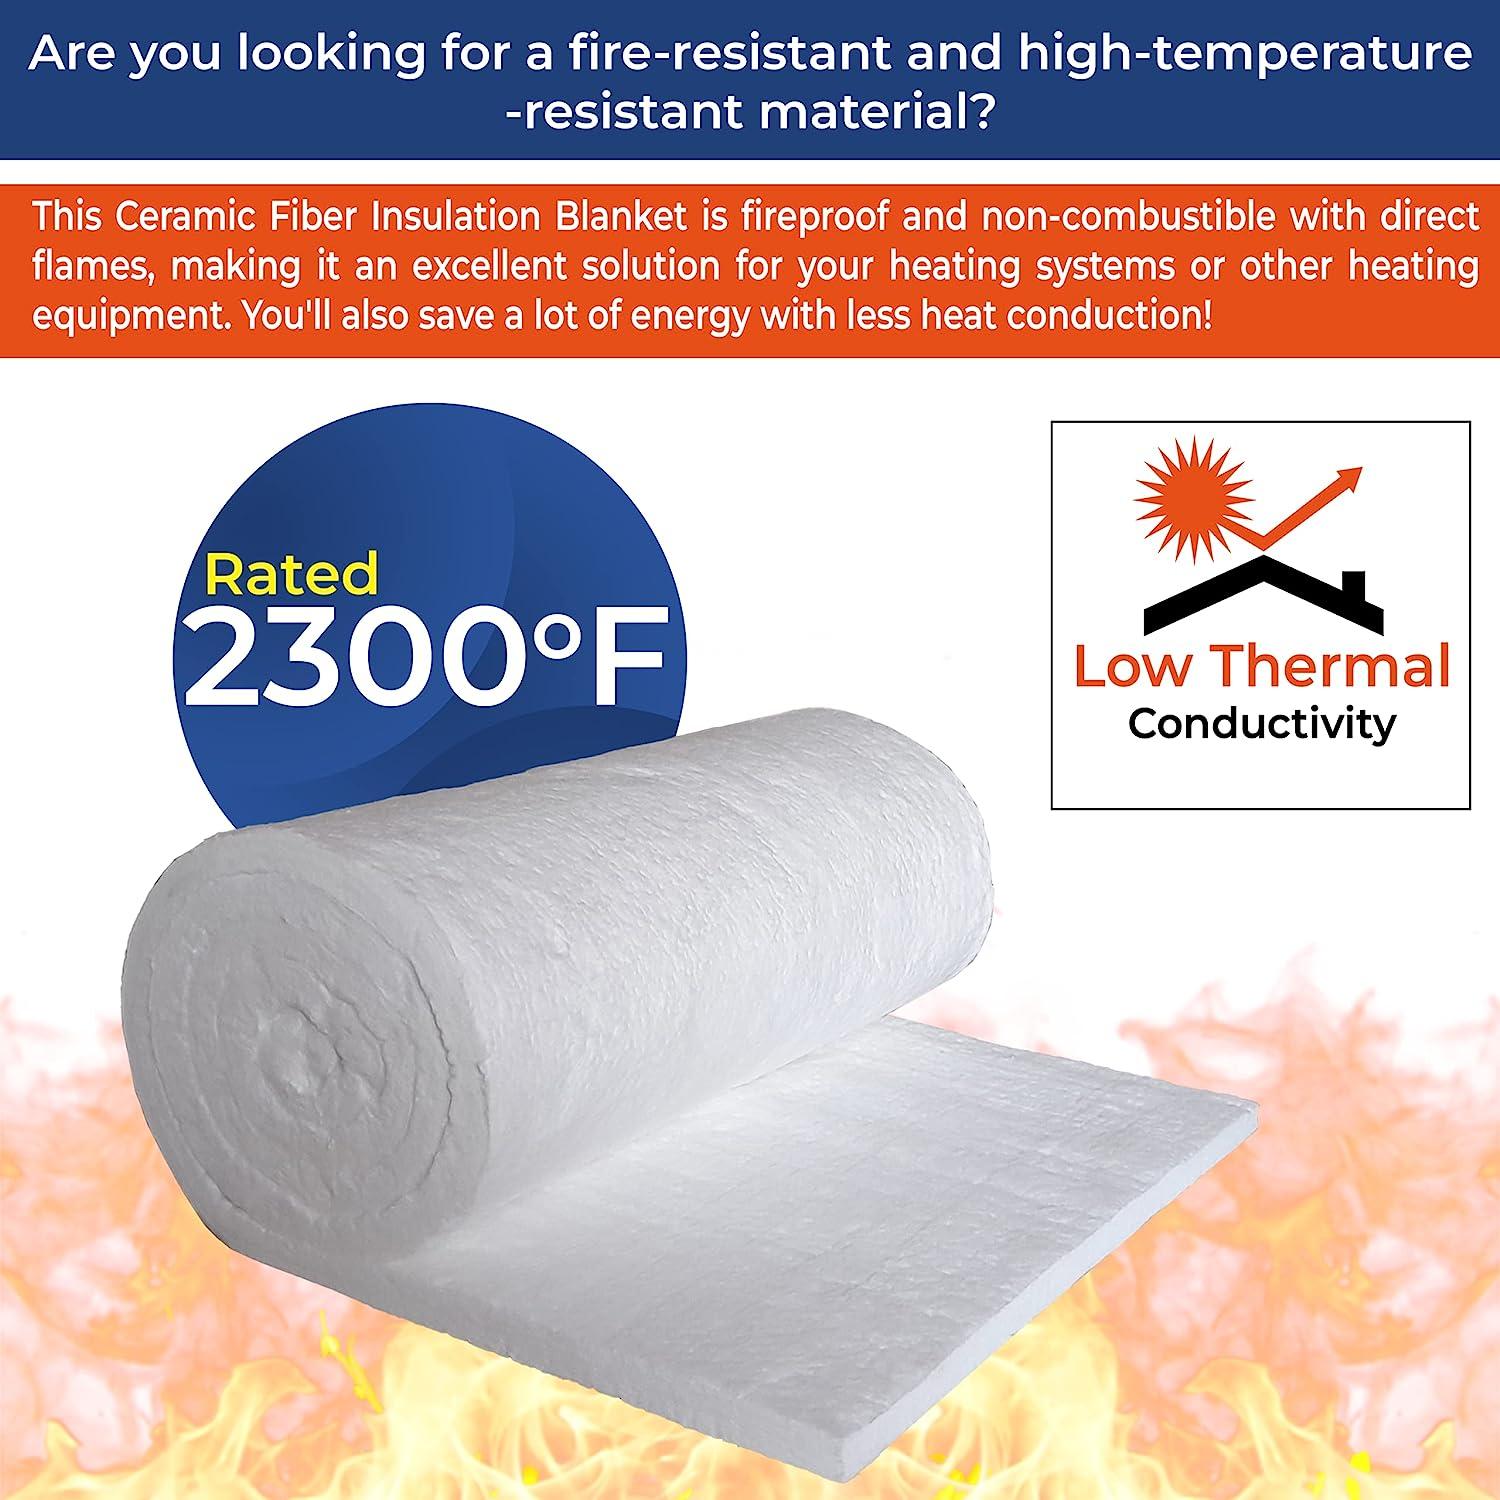 WMEIE Ceramic Fiber Insulating Blanket, High Density High Temperature  2300F, Durable, Lightweight, for Wood Stoves Fireplaces Furnaces Forges  Kiln